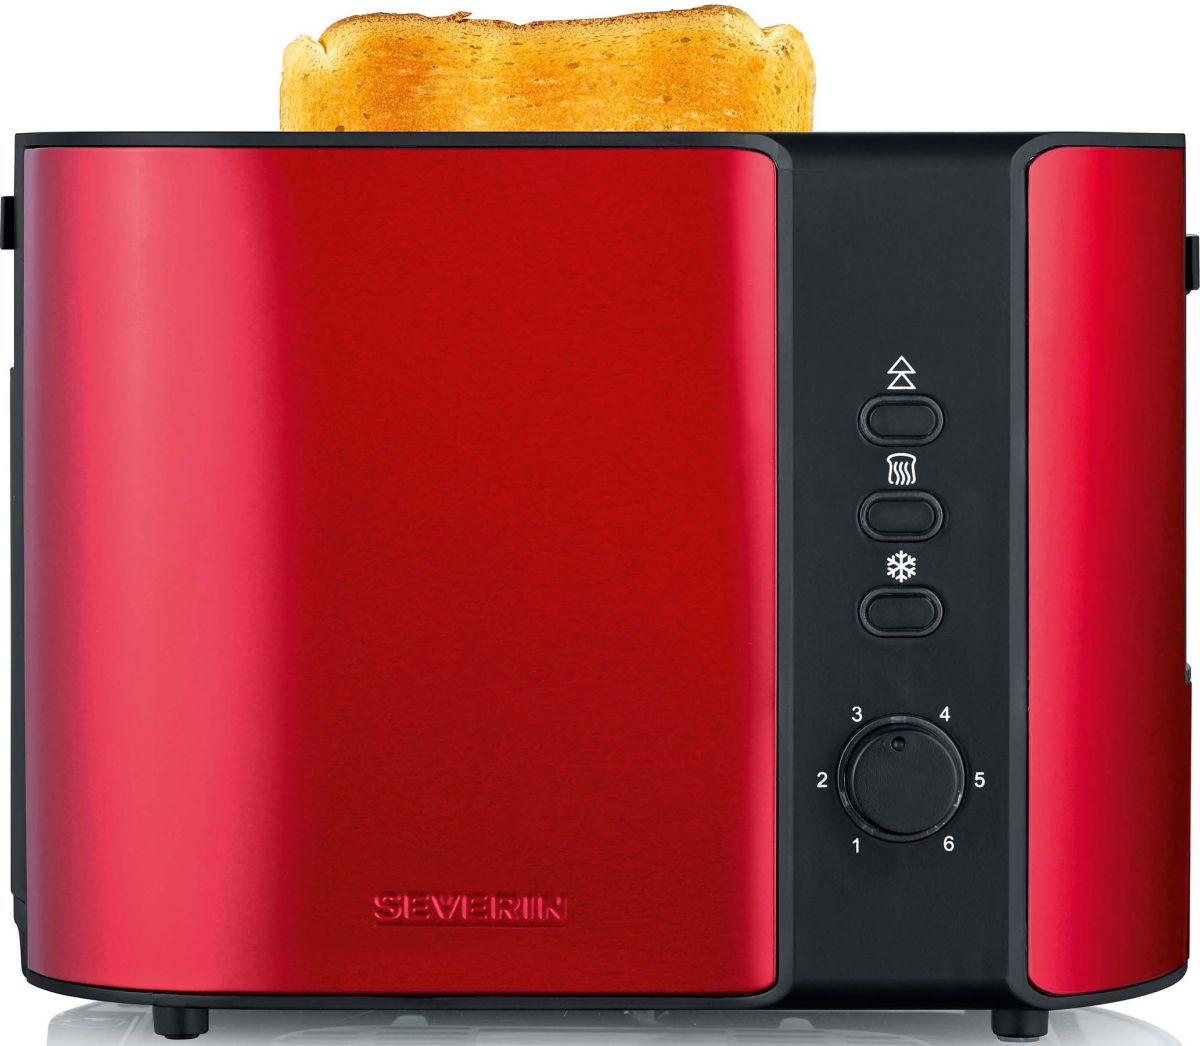 Toaster AT 2217 Fire red-black